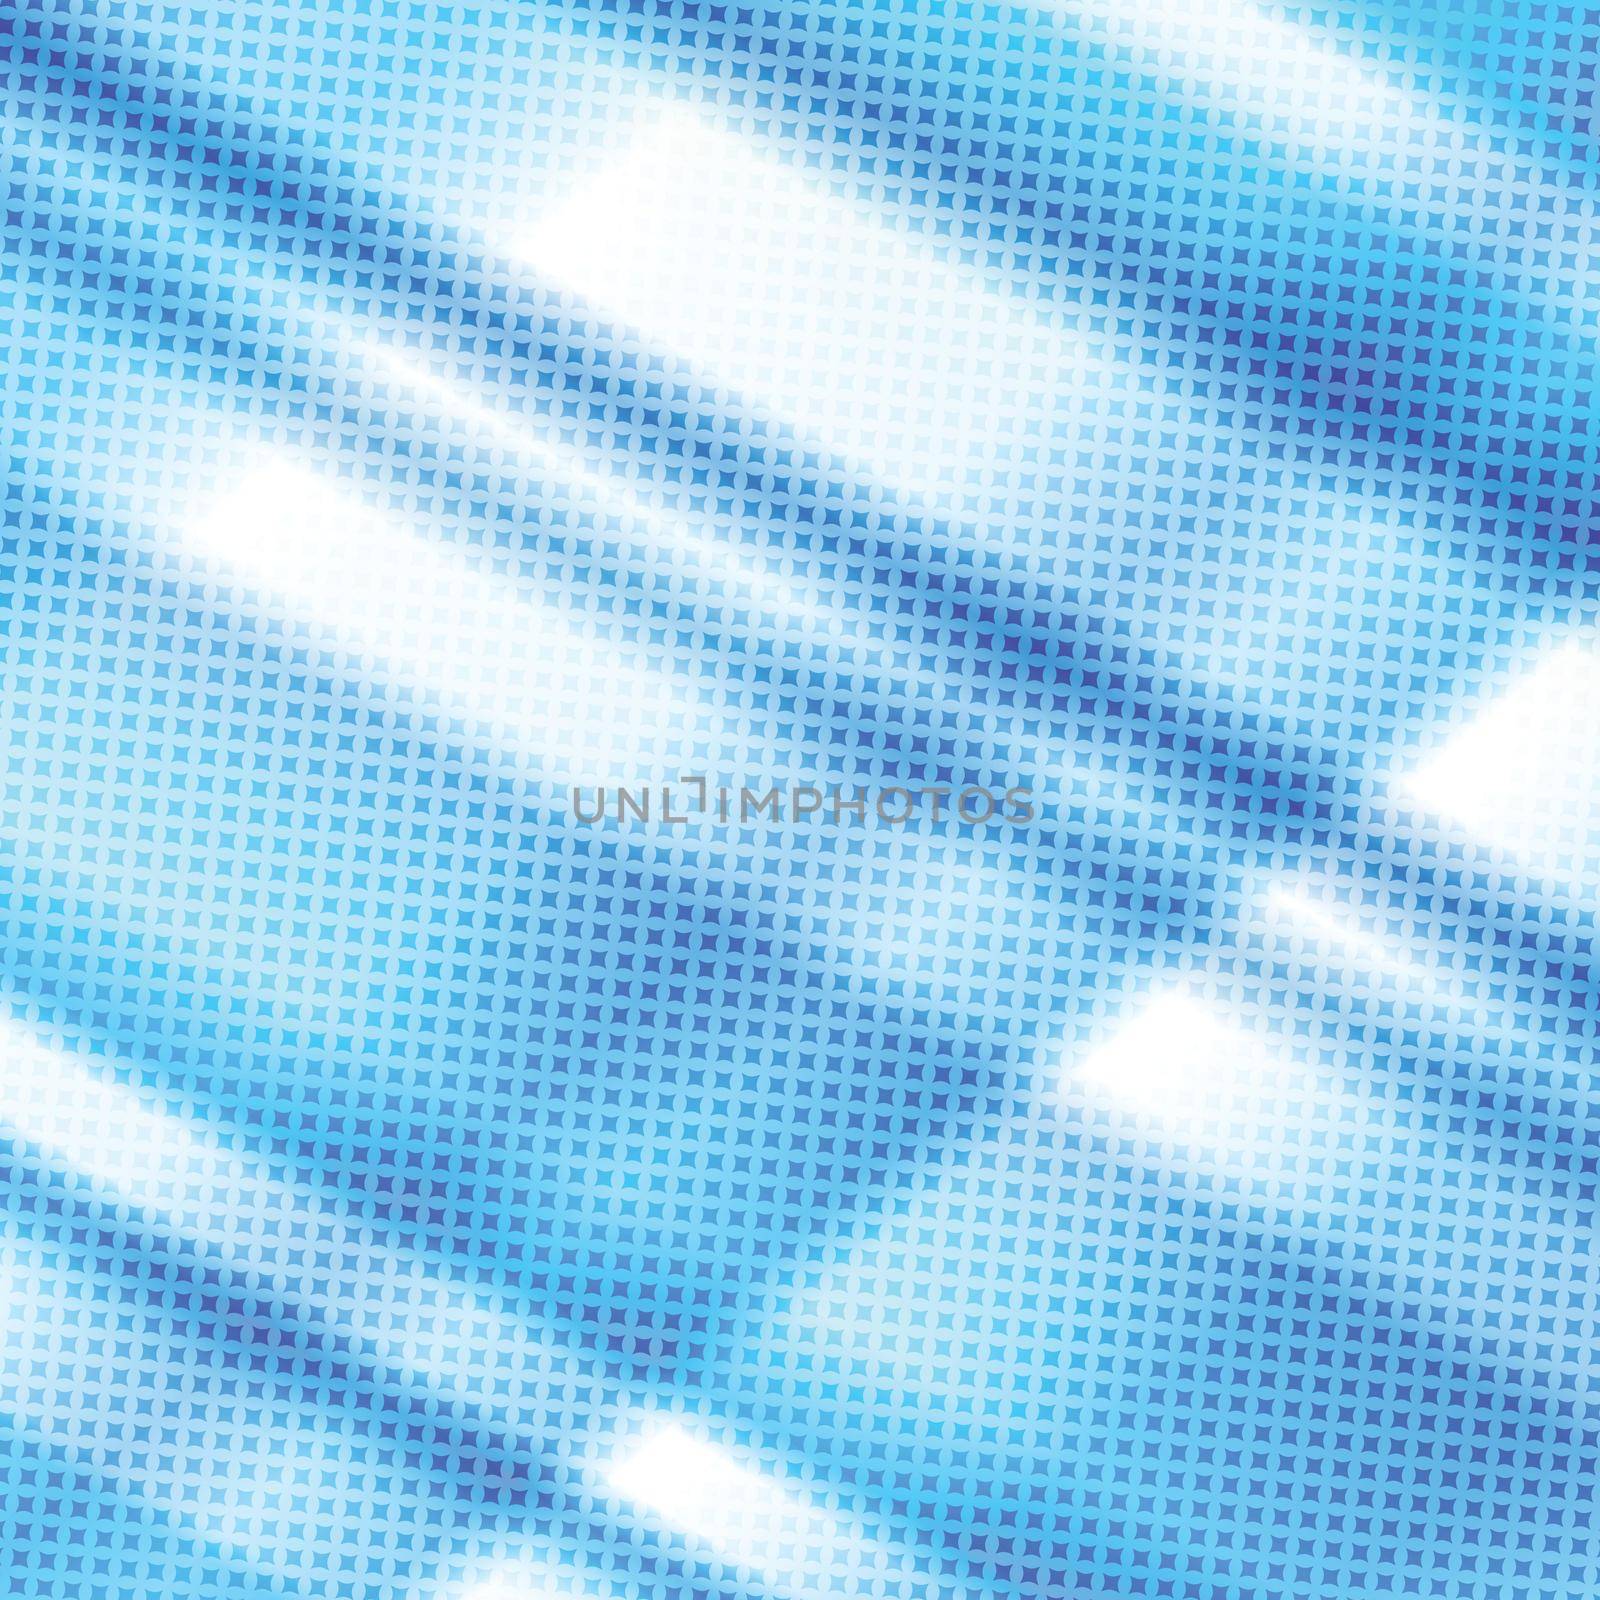 90-s style. Creative illustration in halftone style with pink and blue gradient. Abstract colorful geometric background. Pattern for wallpaper, web page, textures.